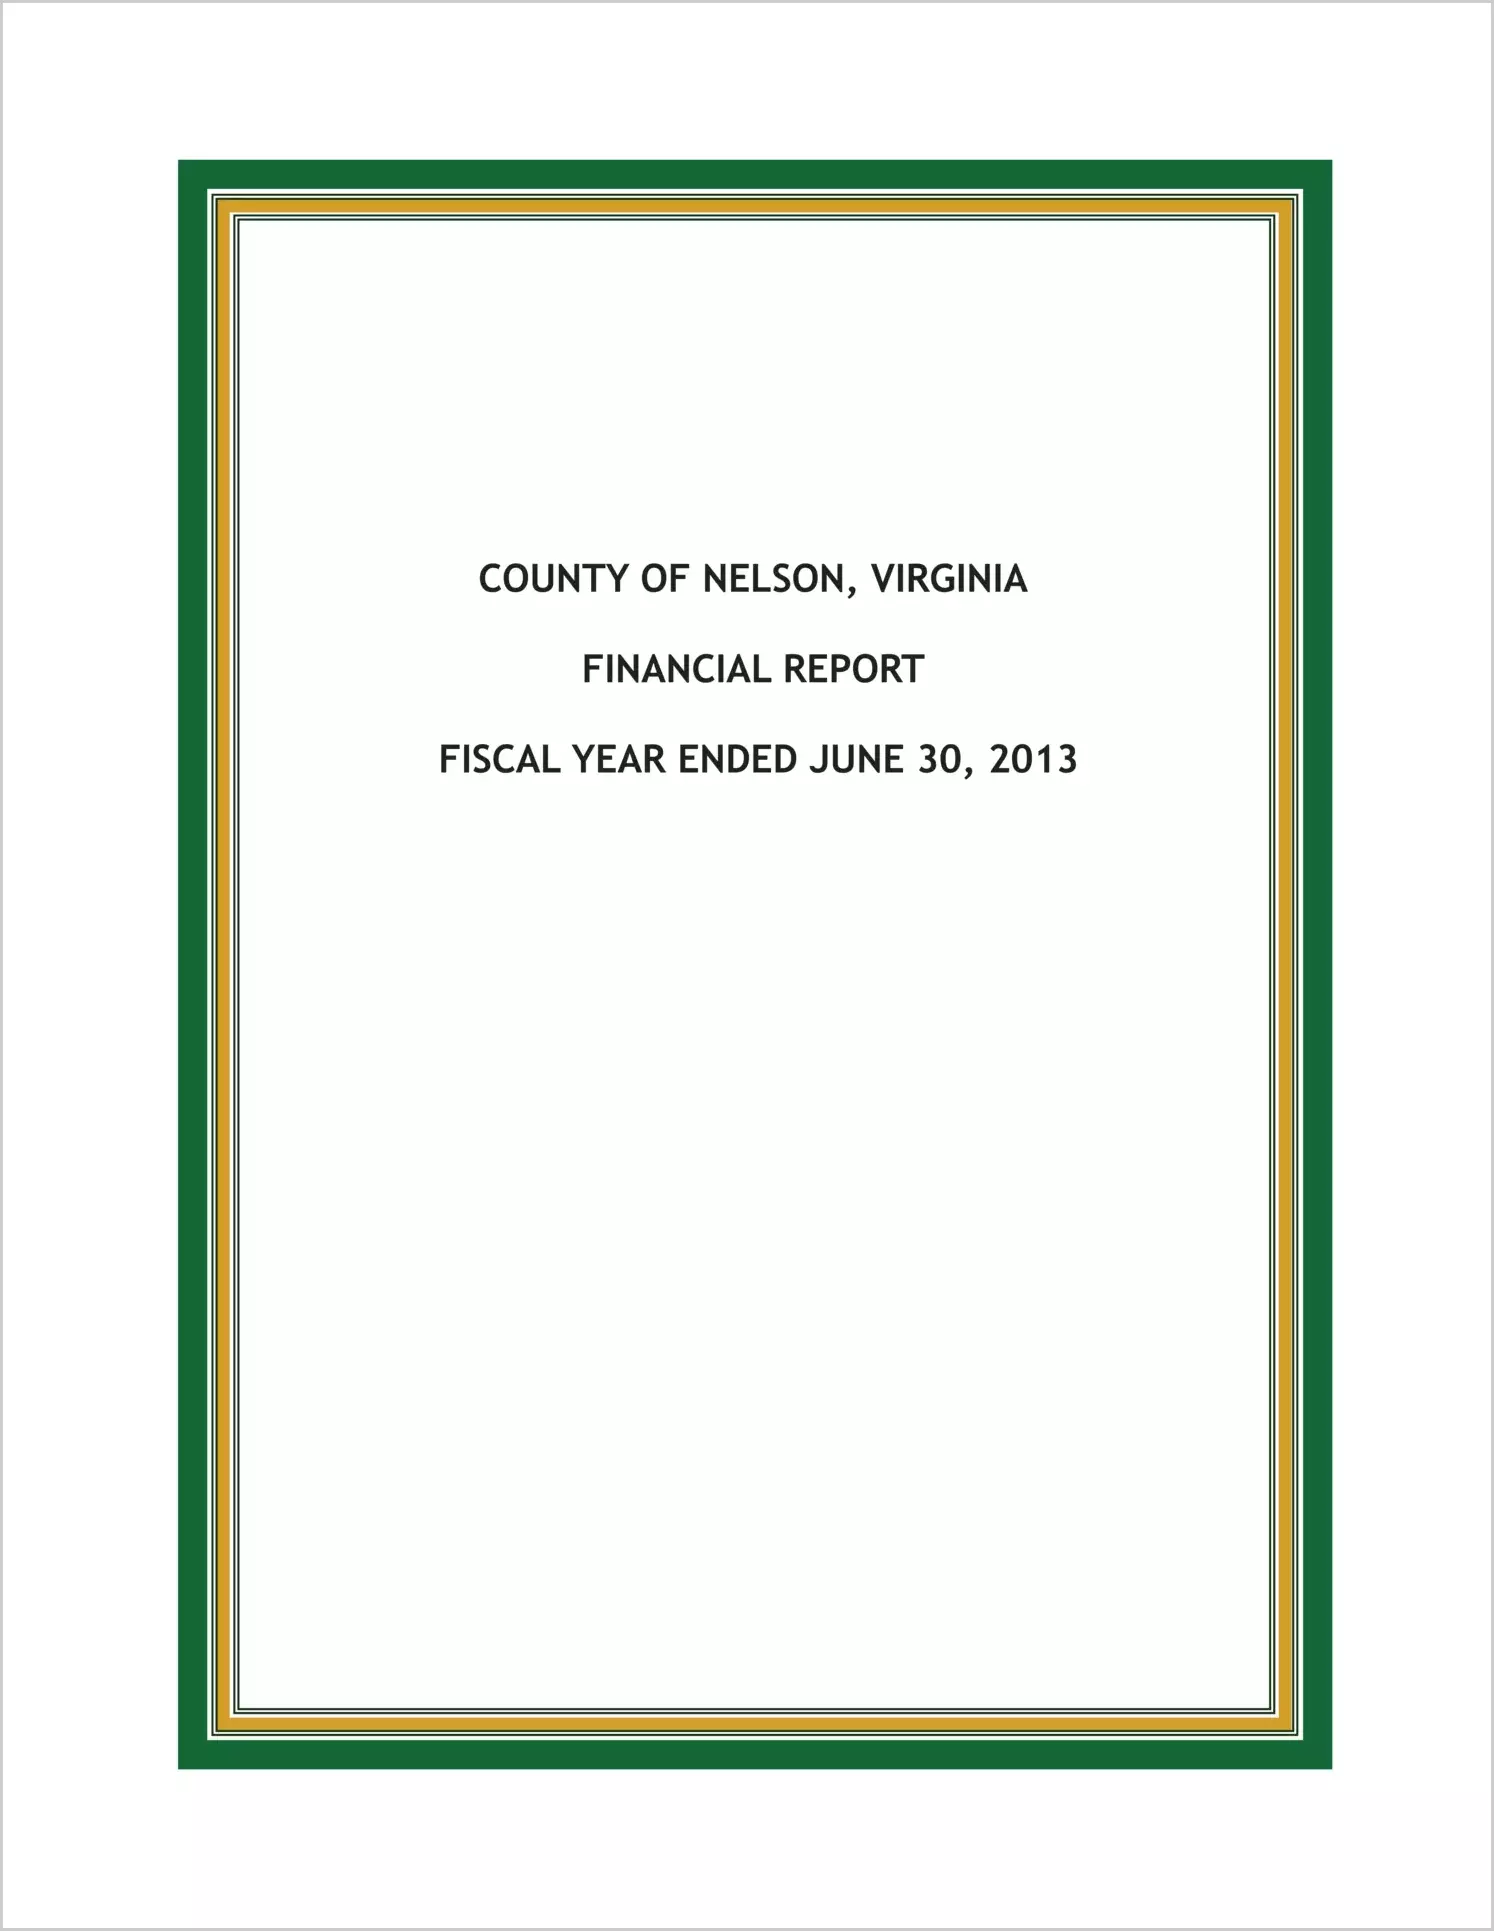 2013 Annual Financial Report for County of Nelson